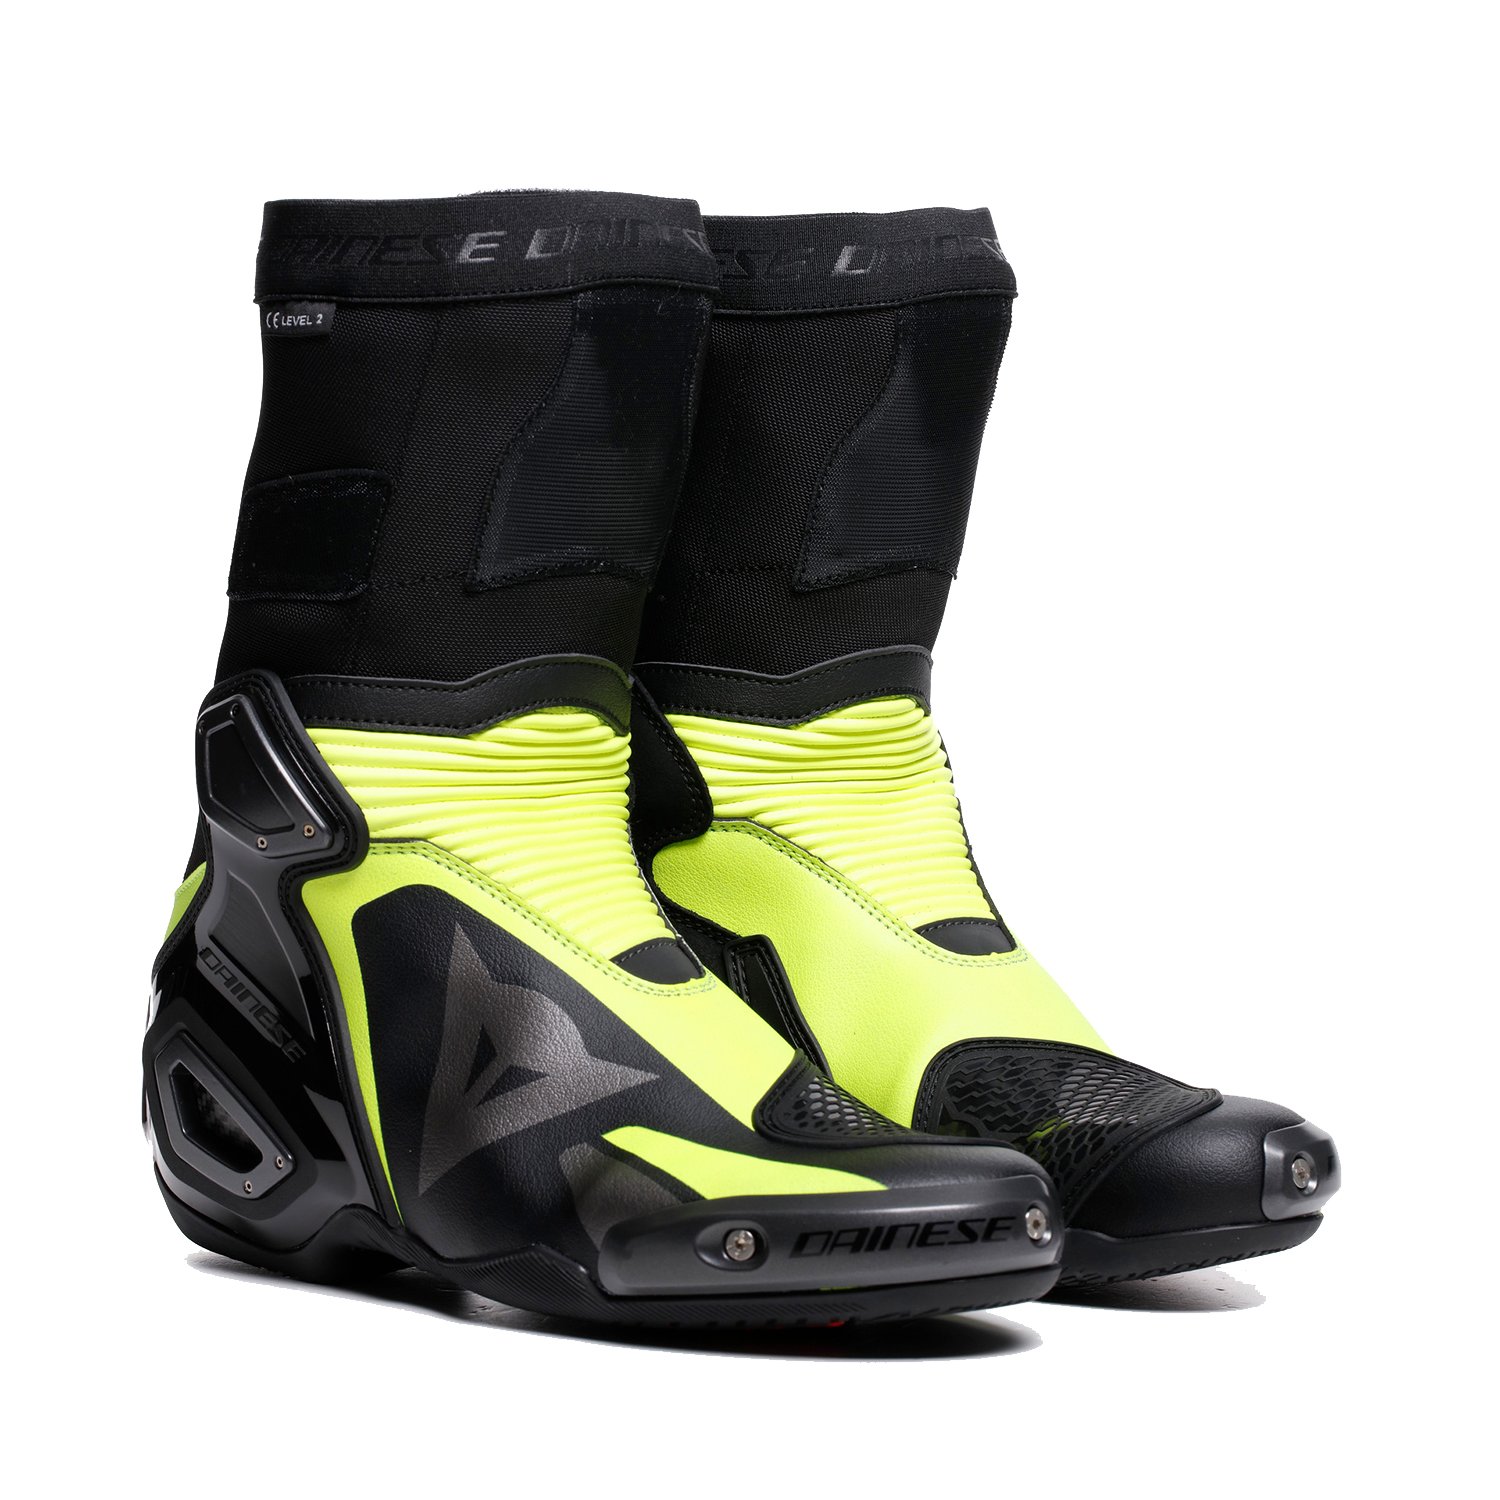 Image of Dainese Axial 2 Boots Black Yellow Fluo Size 41 ID 8051019739469